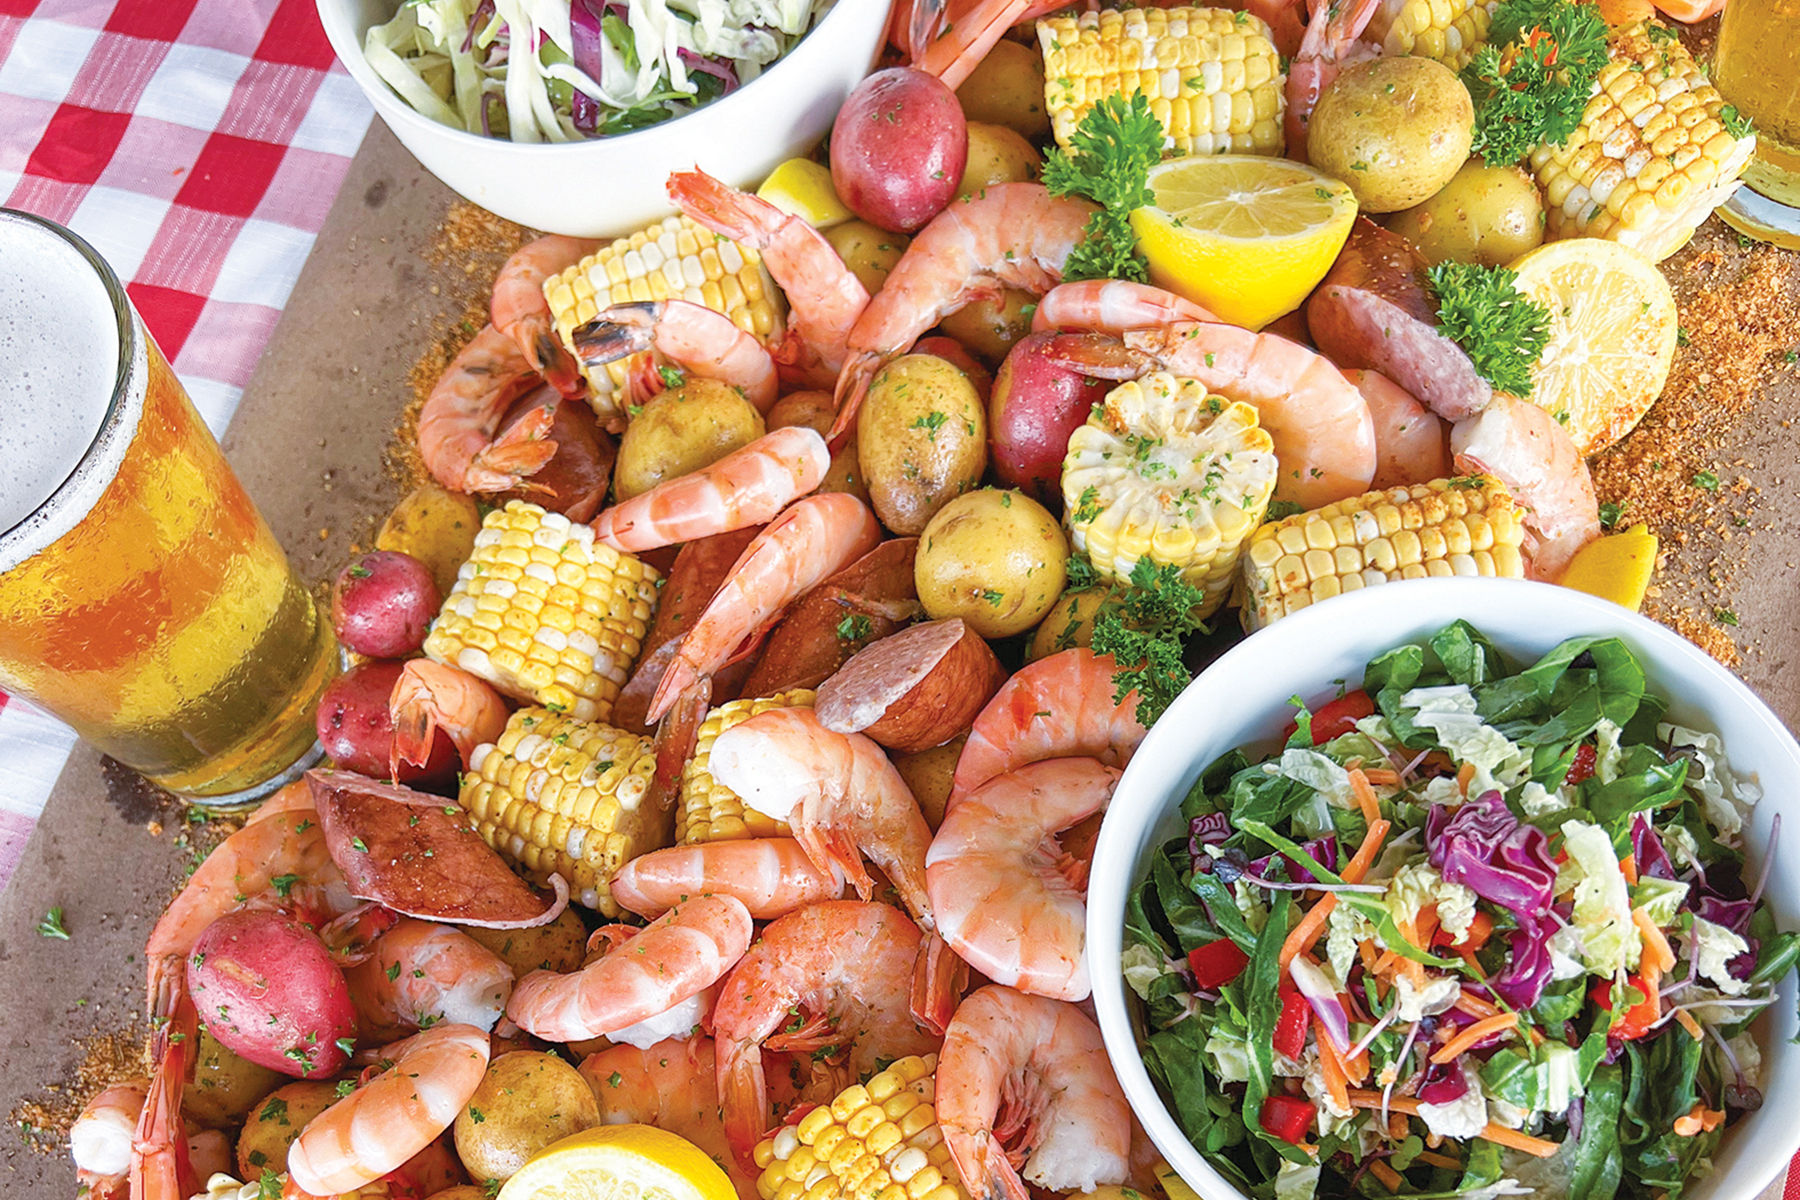 How to Throw a Backyard Seafood Boil Party